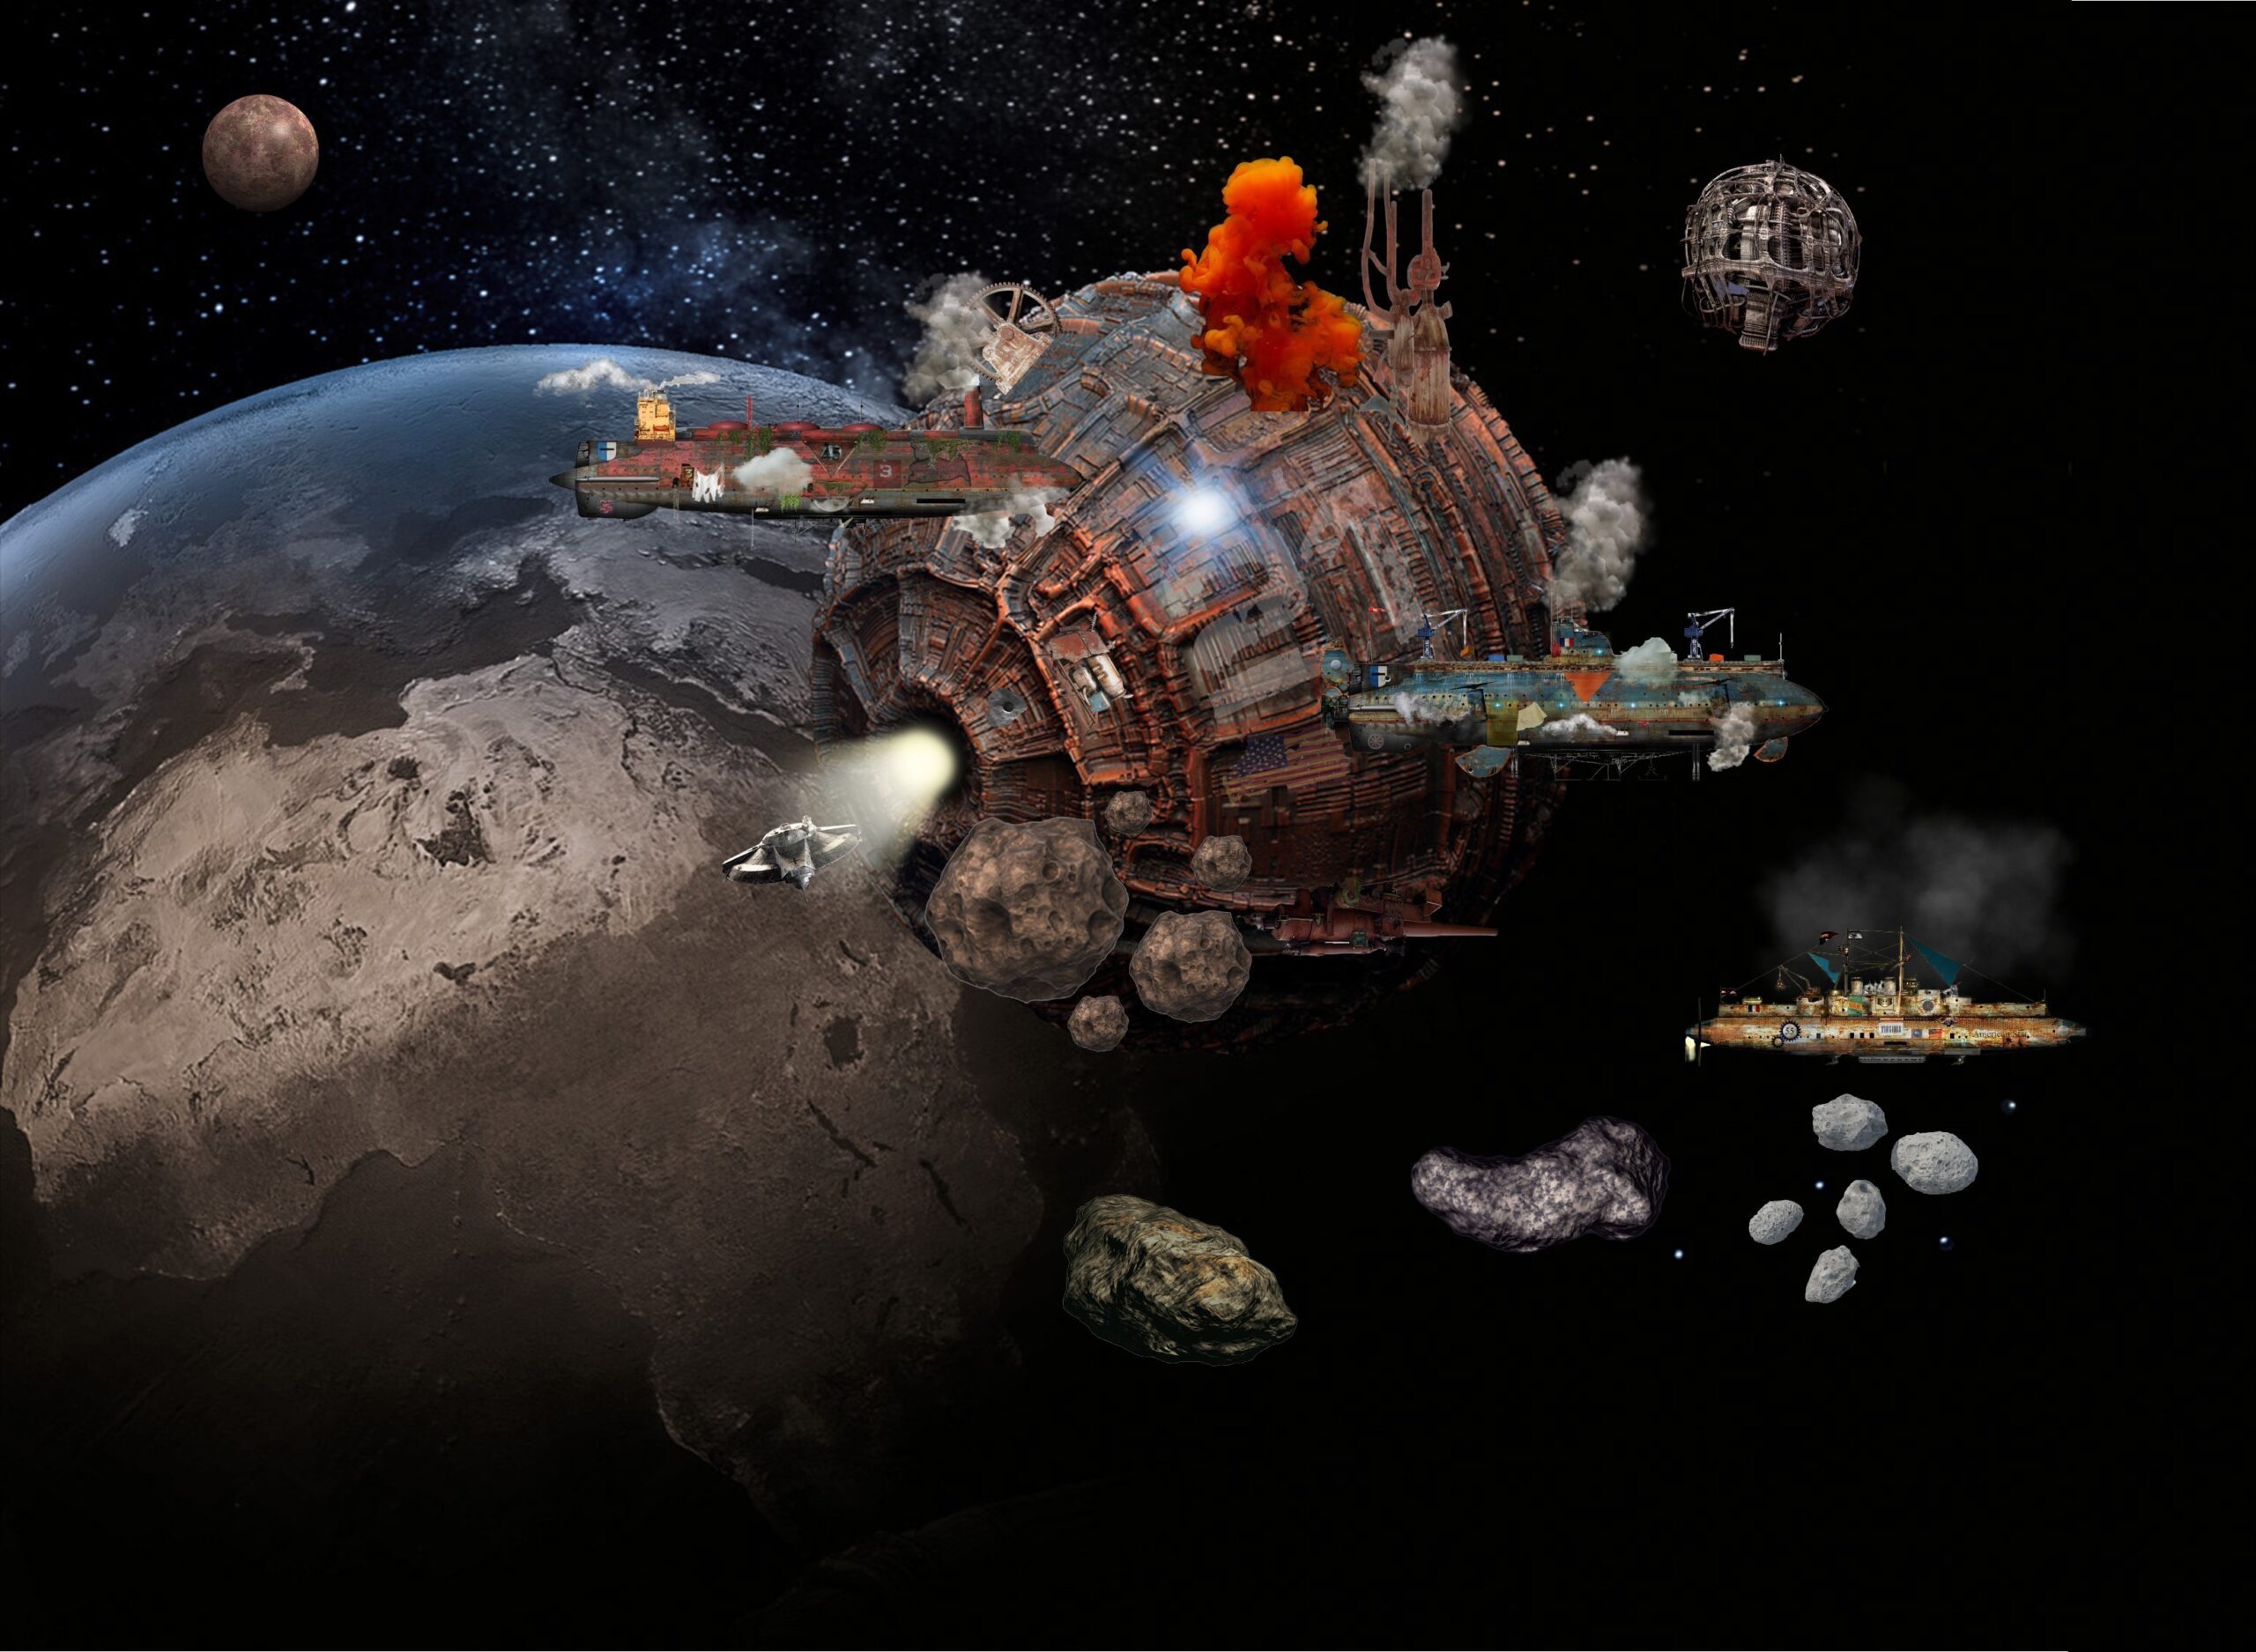 asteroid mining and resource extraction